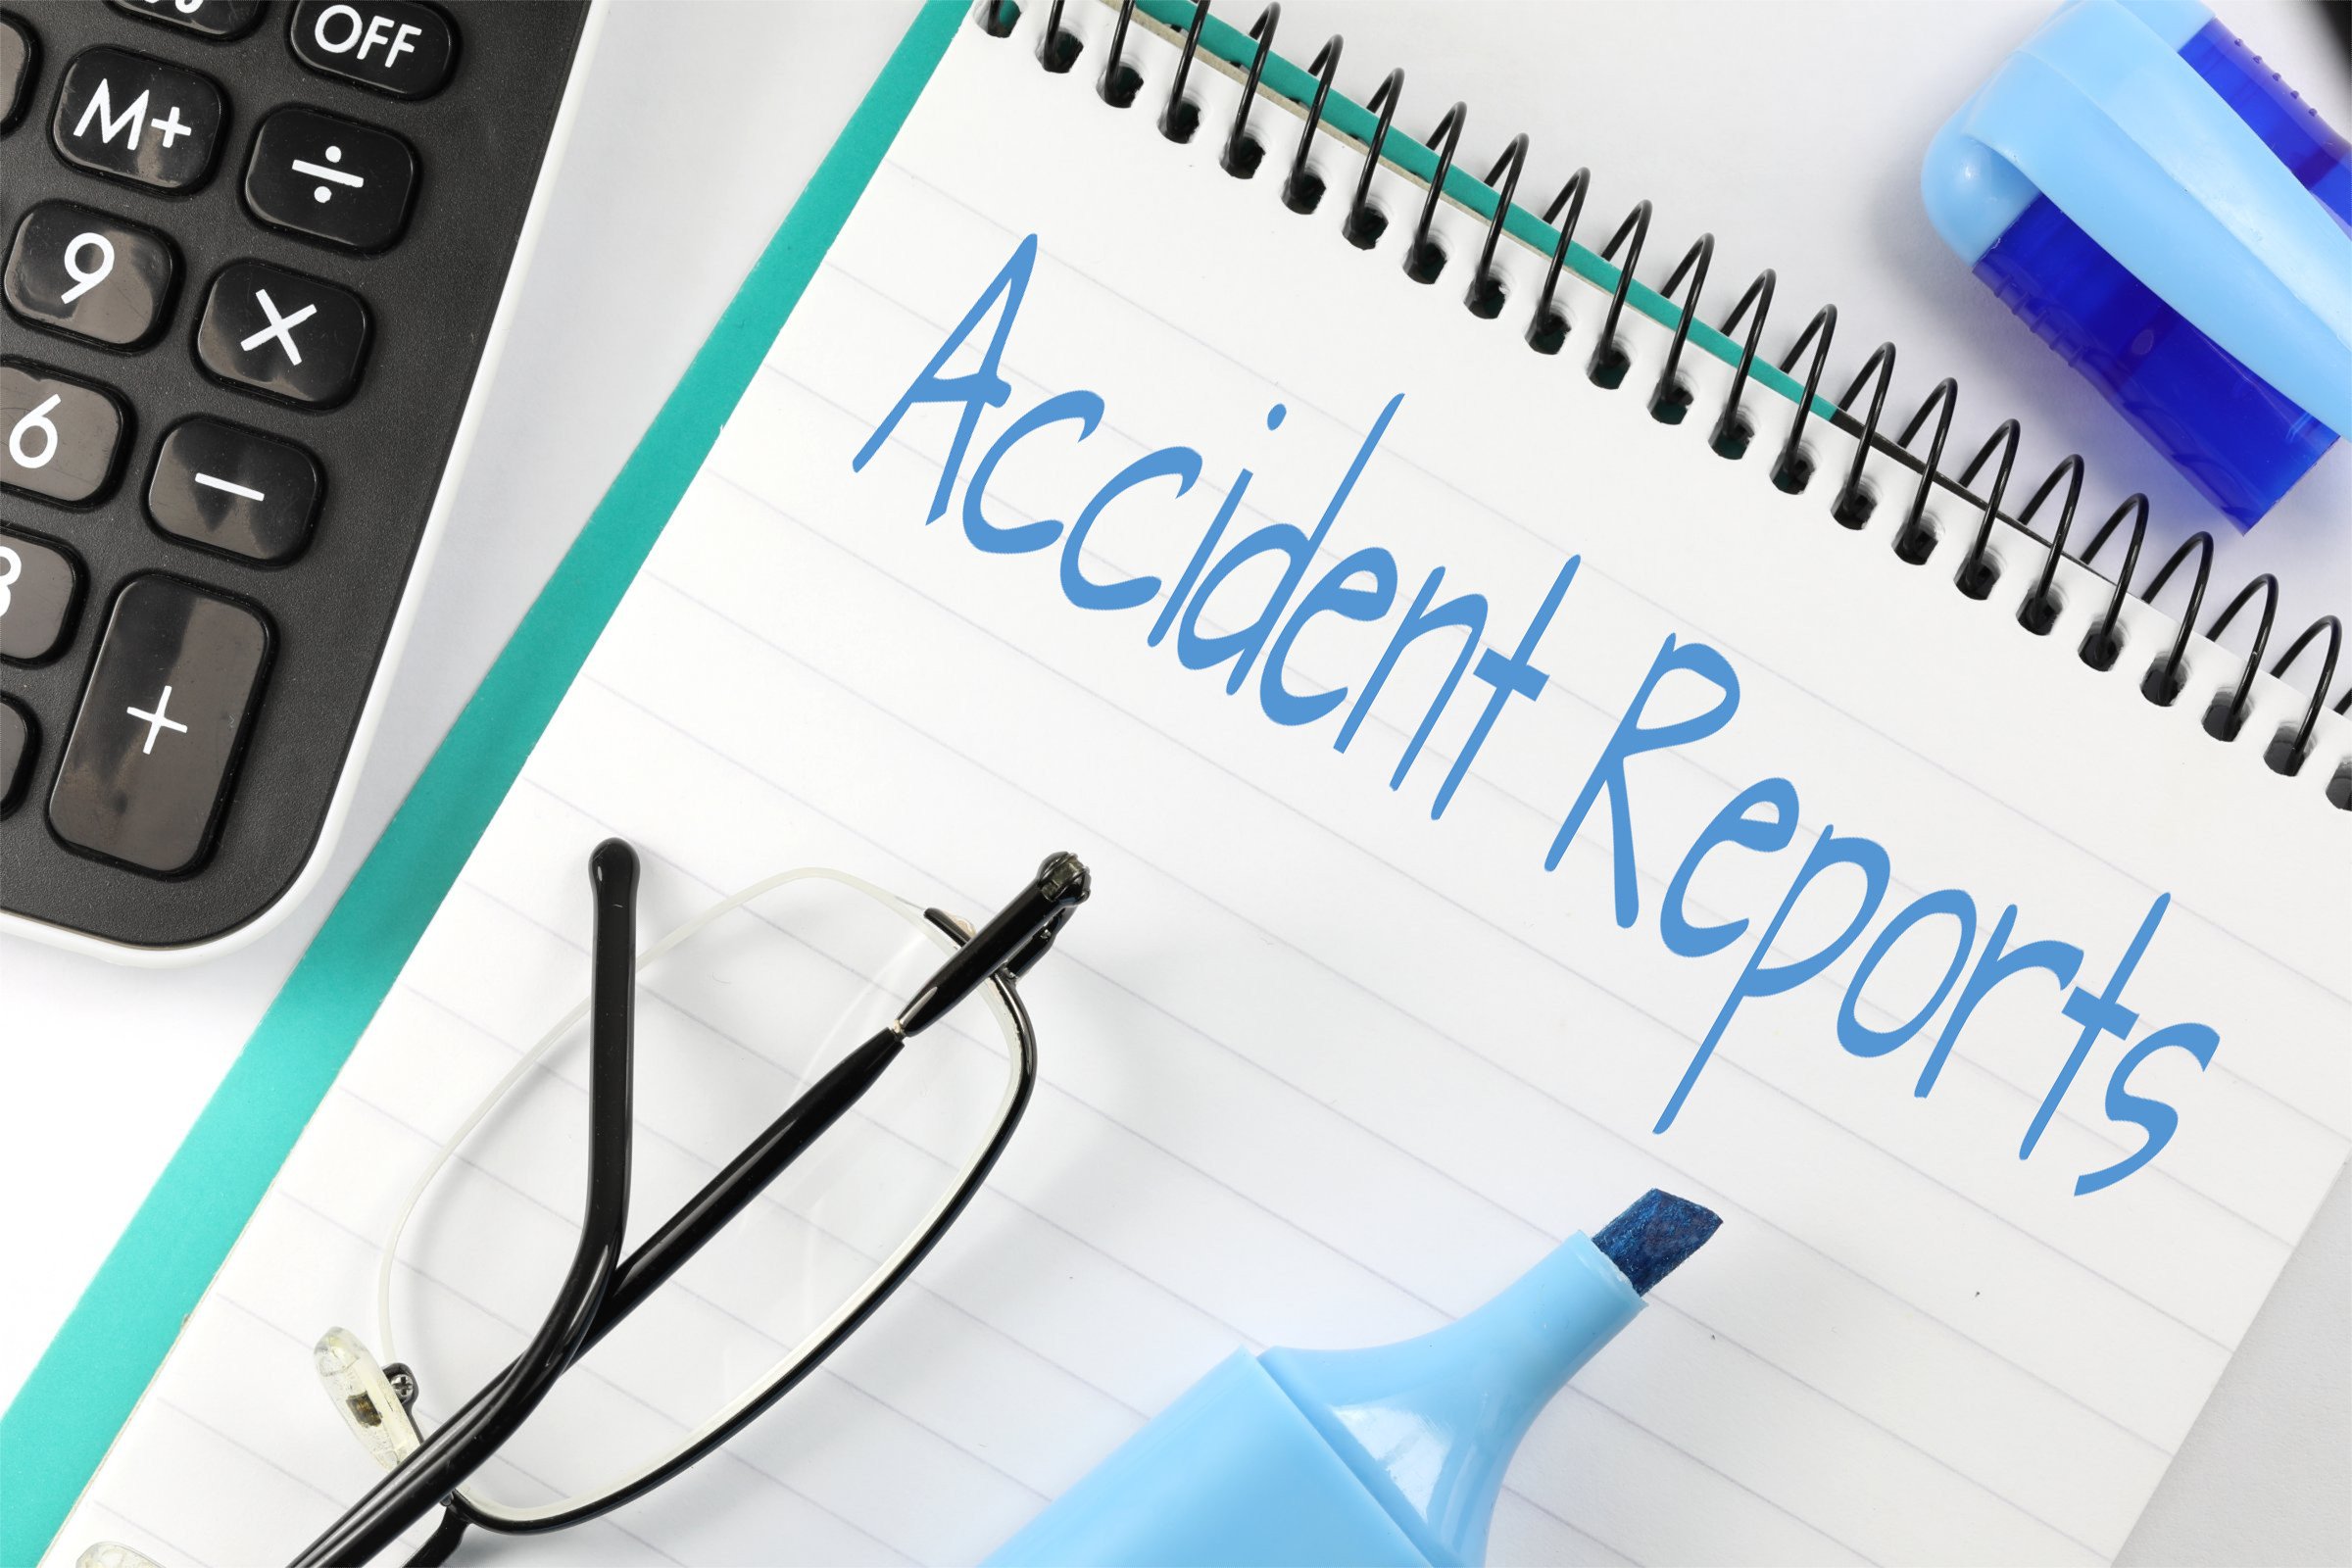 accident reports